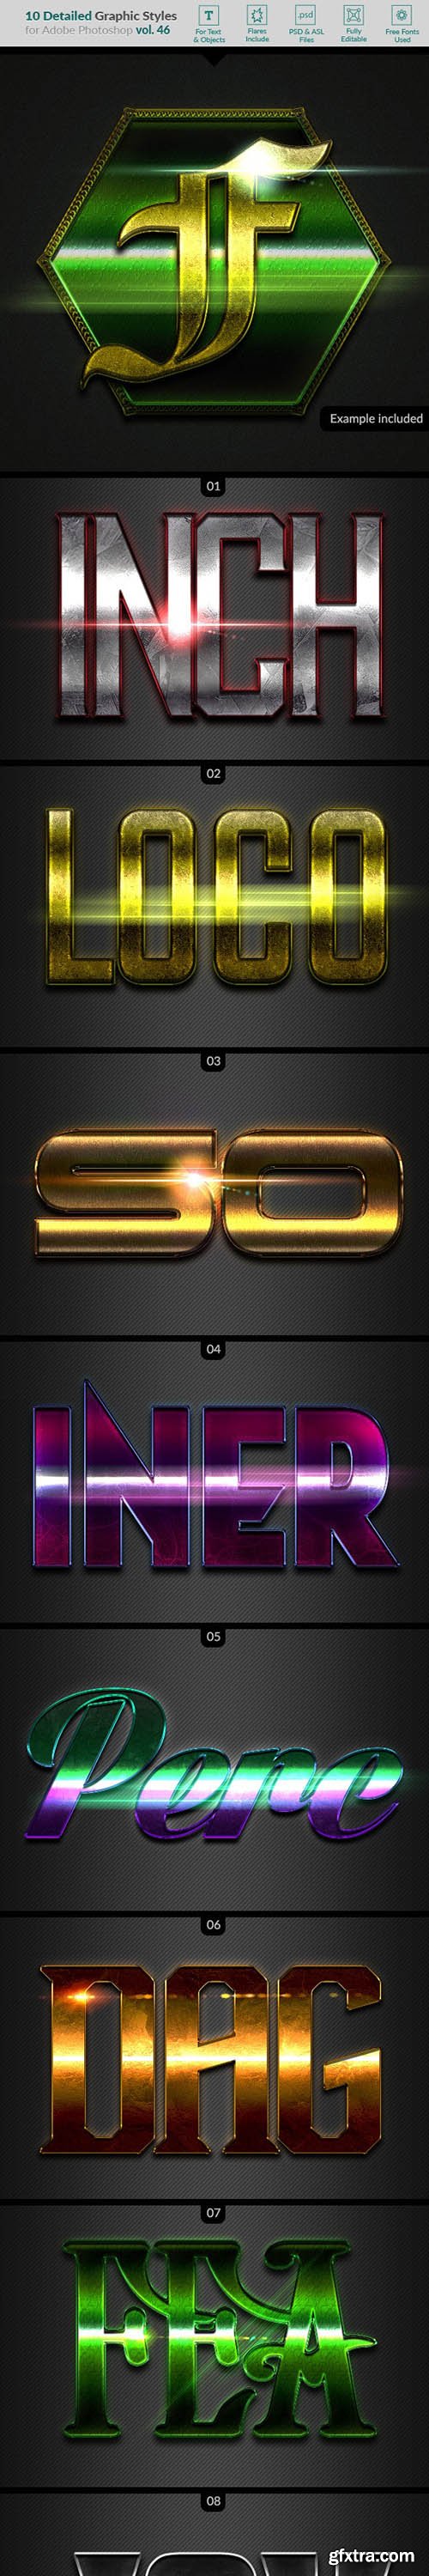 Graphicriver - 10 Text Effects Vol. 46 25813616